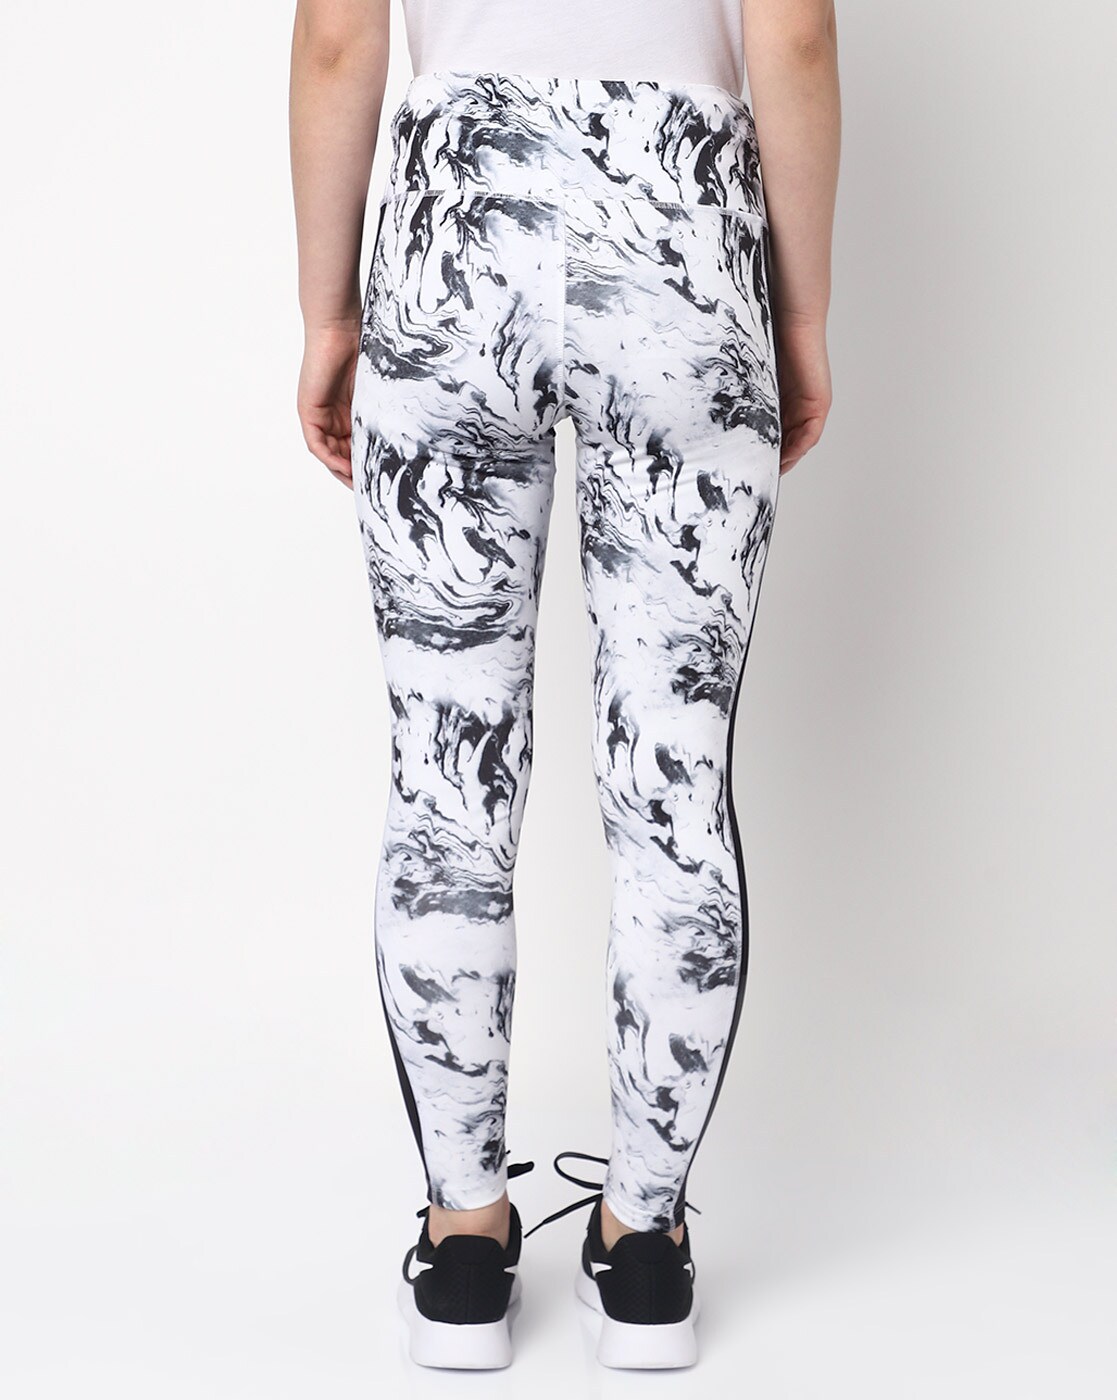 Buy White & Black Pyjamas & Shorts for Women by CONVERSE Online